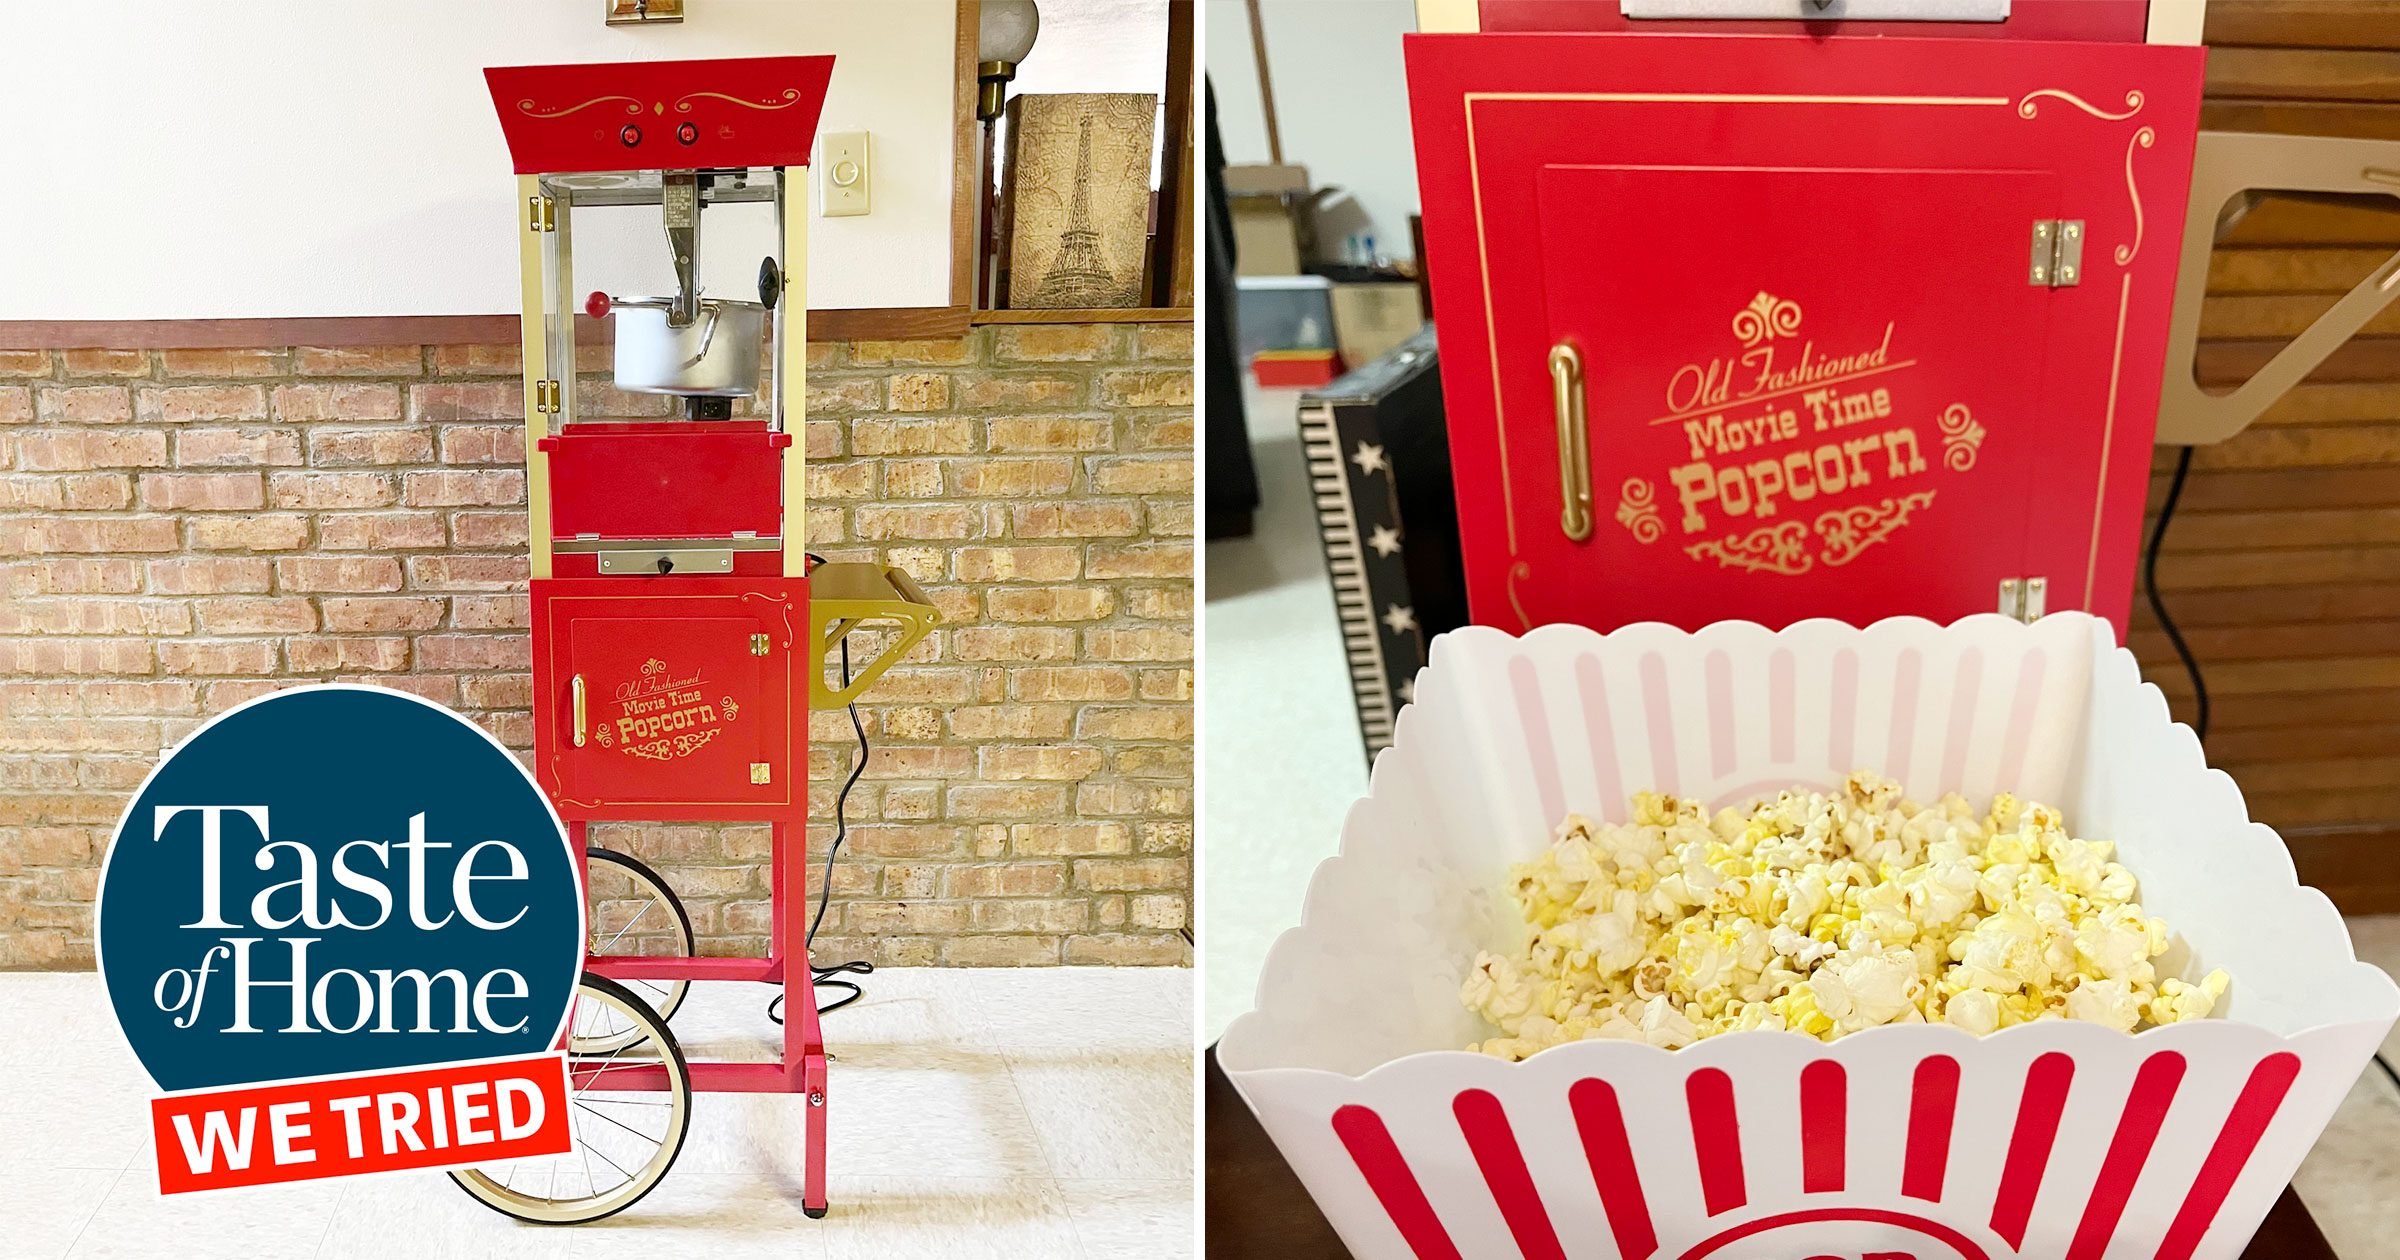 Old Fashioned Movie Time Popcorn Maker Instructions